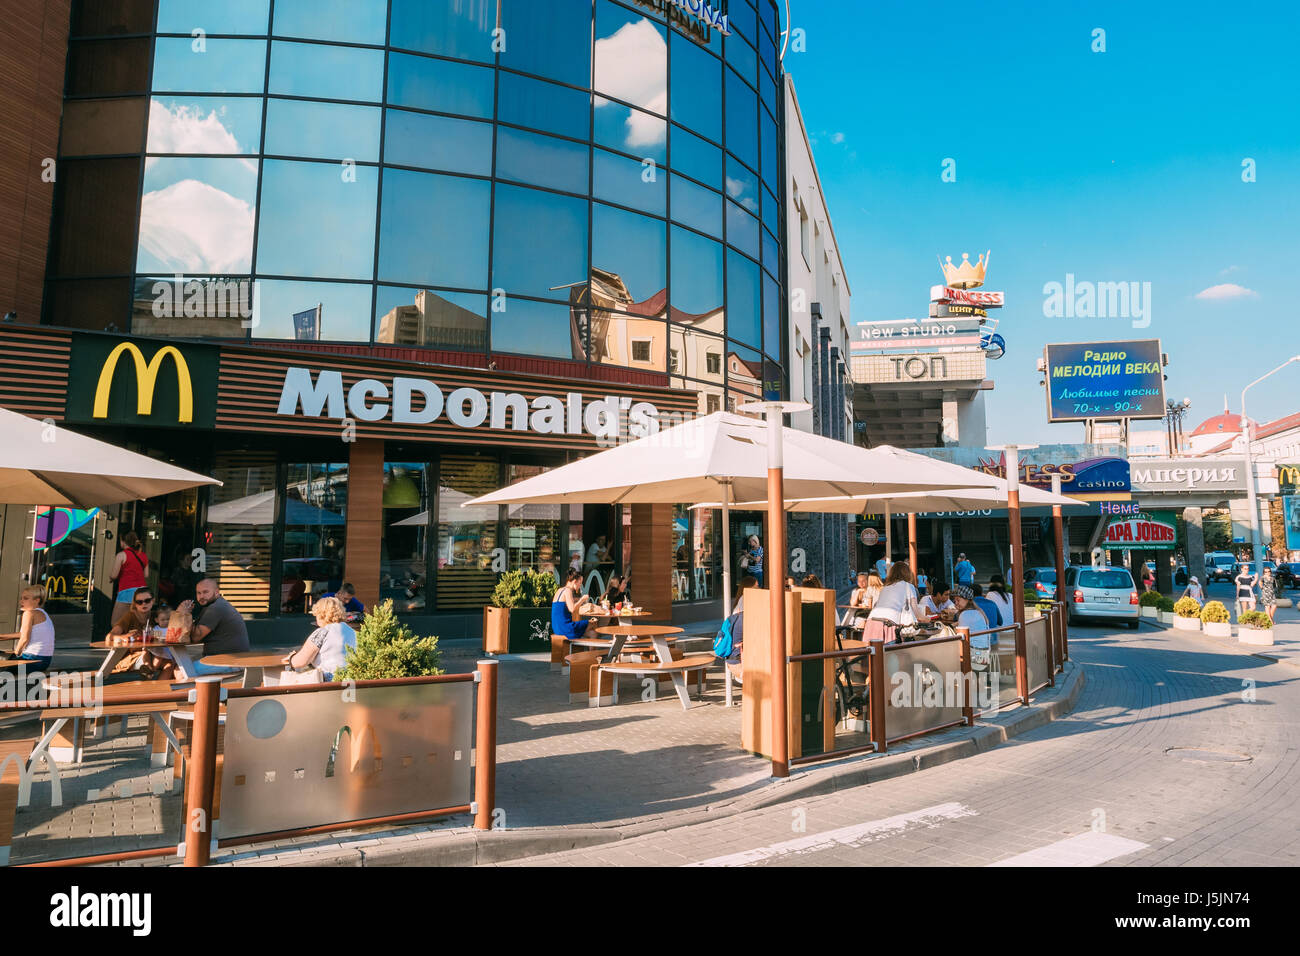 Minsk, Belarus. The Scene Of Ingestion At The Outdoor Crowded McDonald's Fast Food Restaurant On Nemiga Street In Sunny Summer Day Under Blue Sky. Stock Photo